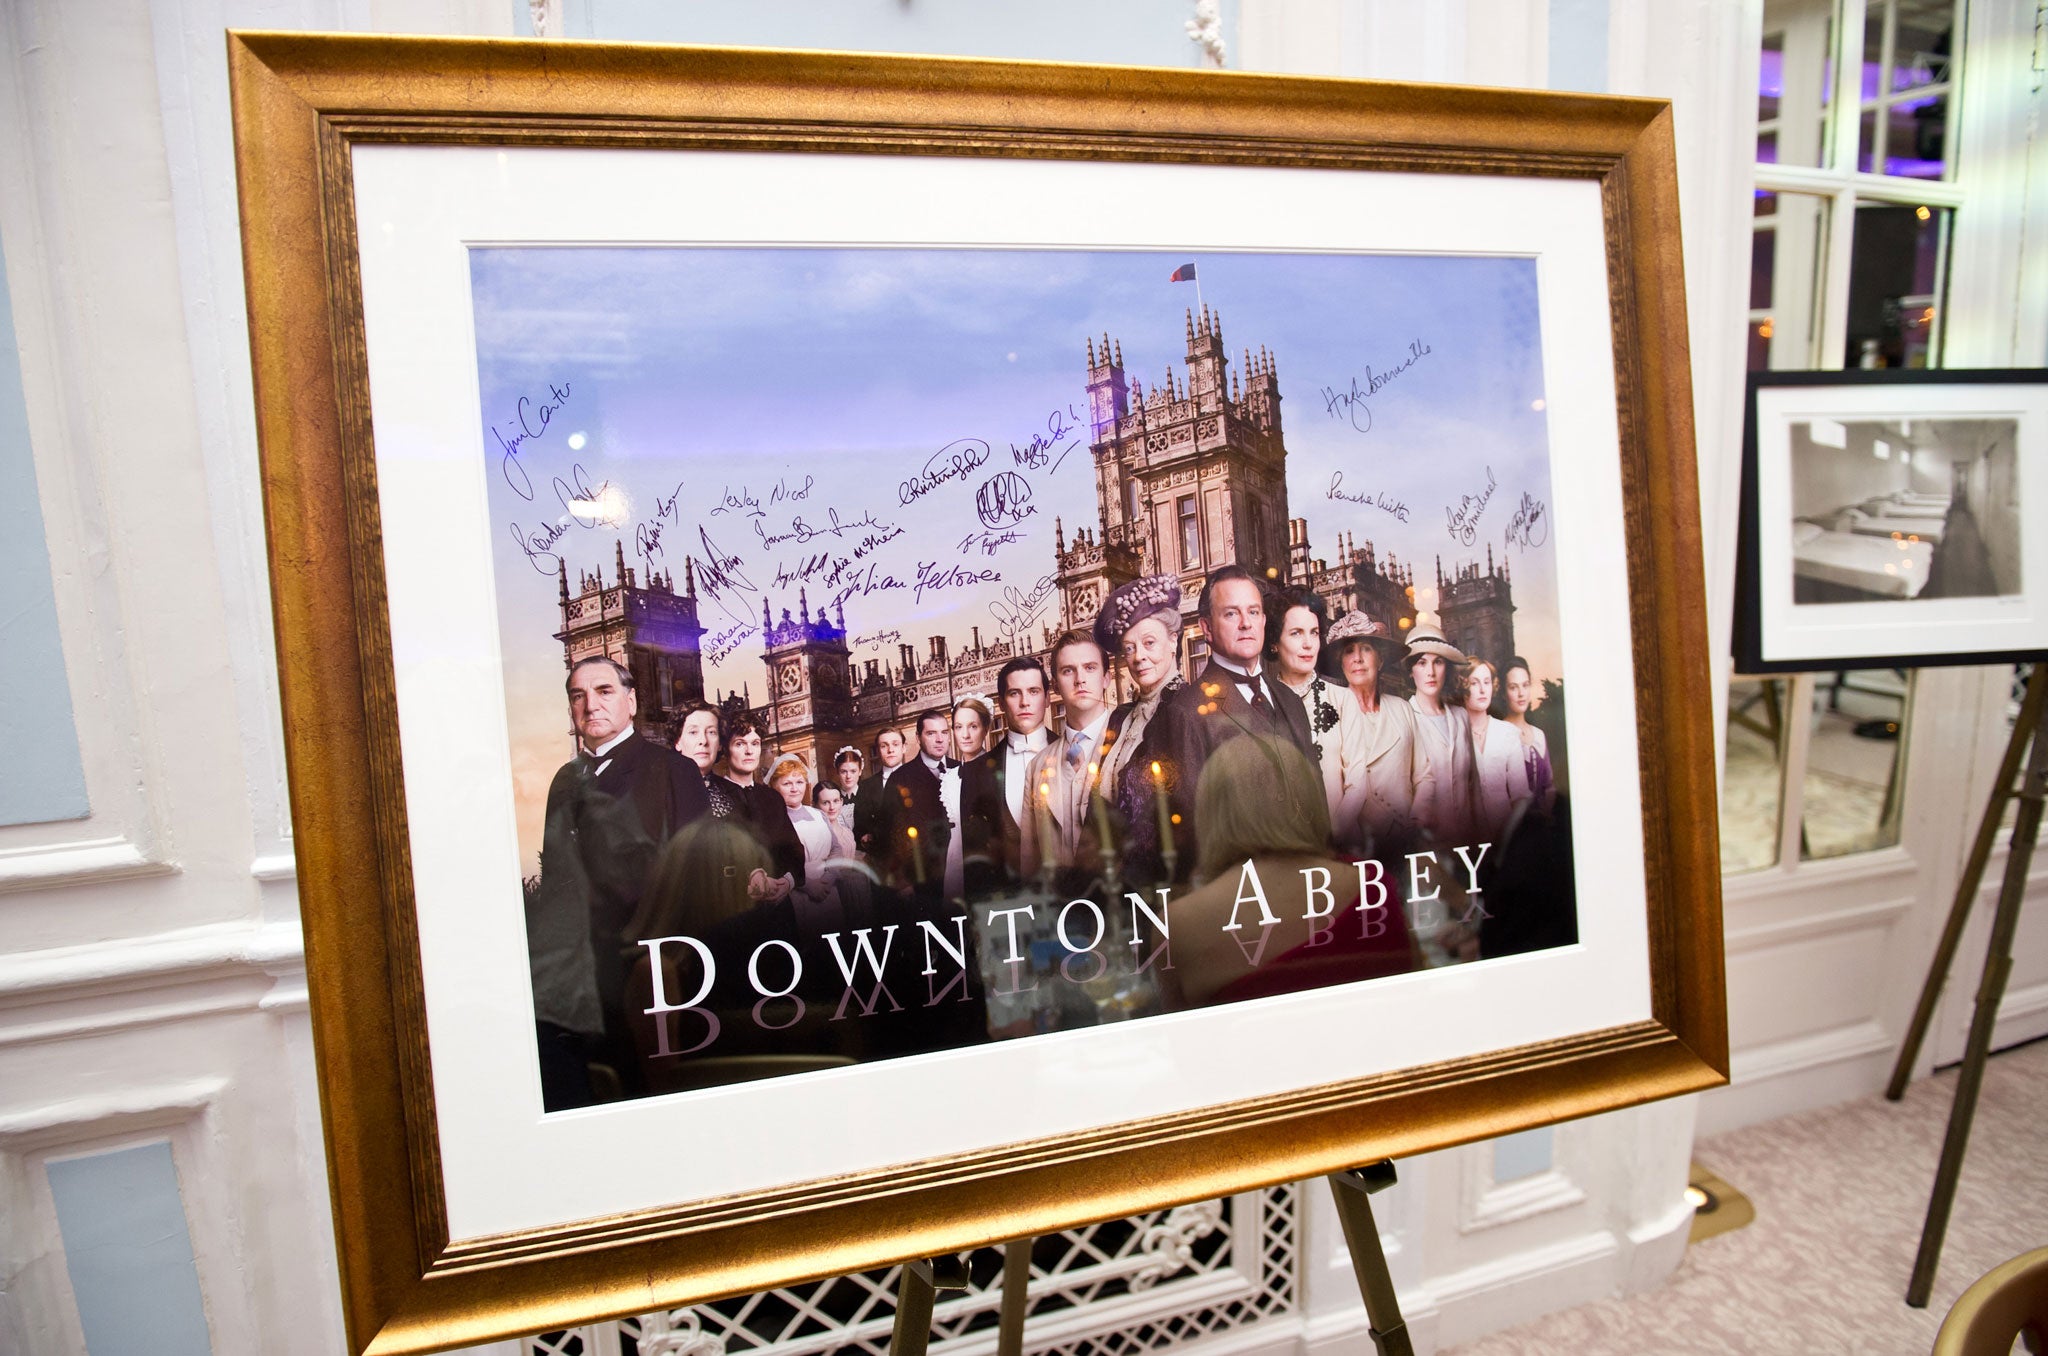 A signed and framed poster of Downton Abbey awaits auction during 'An Evening With Downton Abbey - Raising Money For Merlin - The Medical Relief Charity' at The Savoy Hotel on July 14, 2011 in London, United Kingdom.